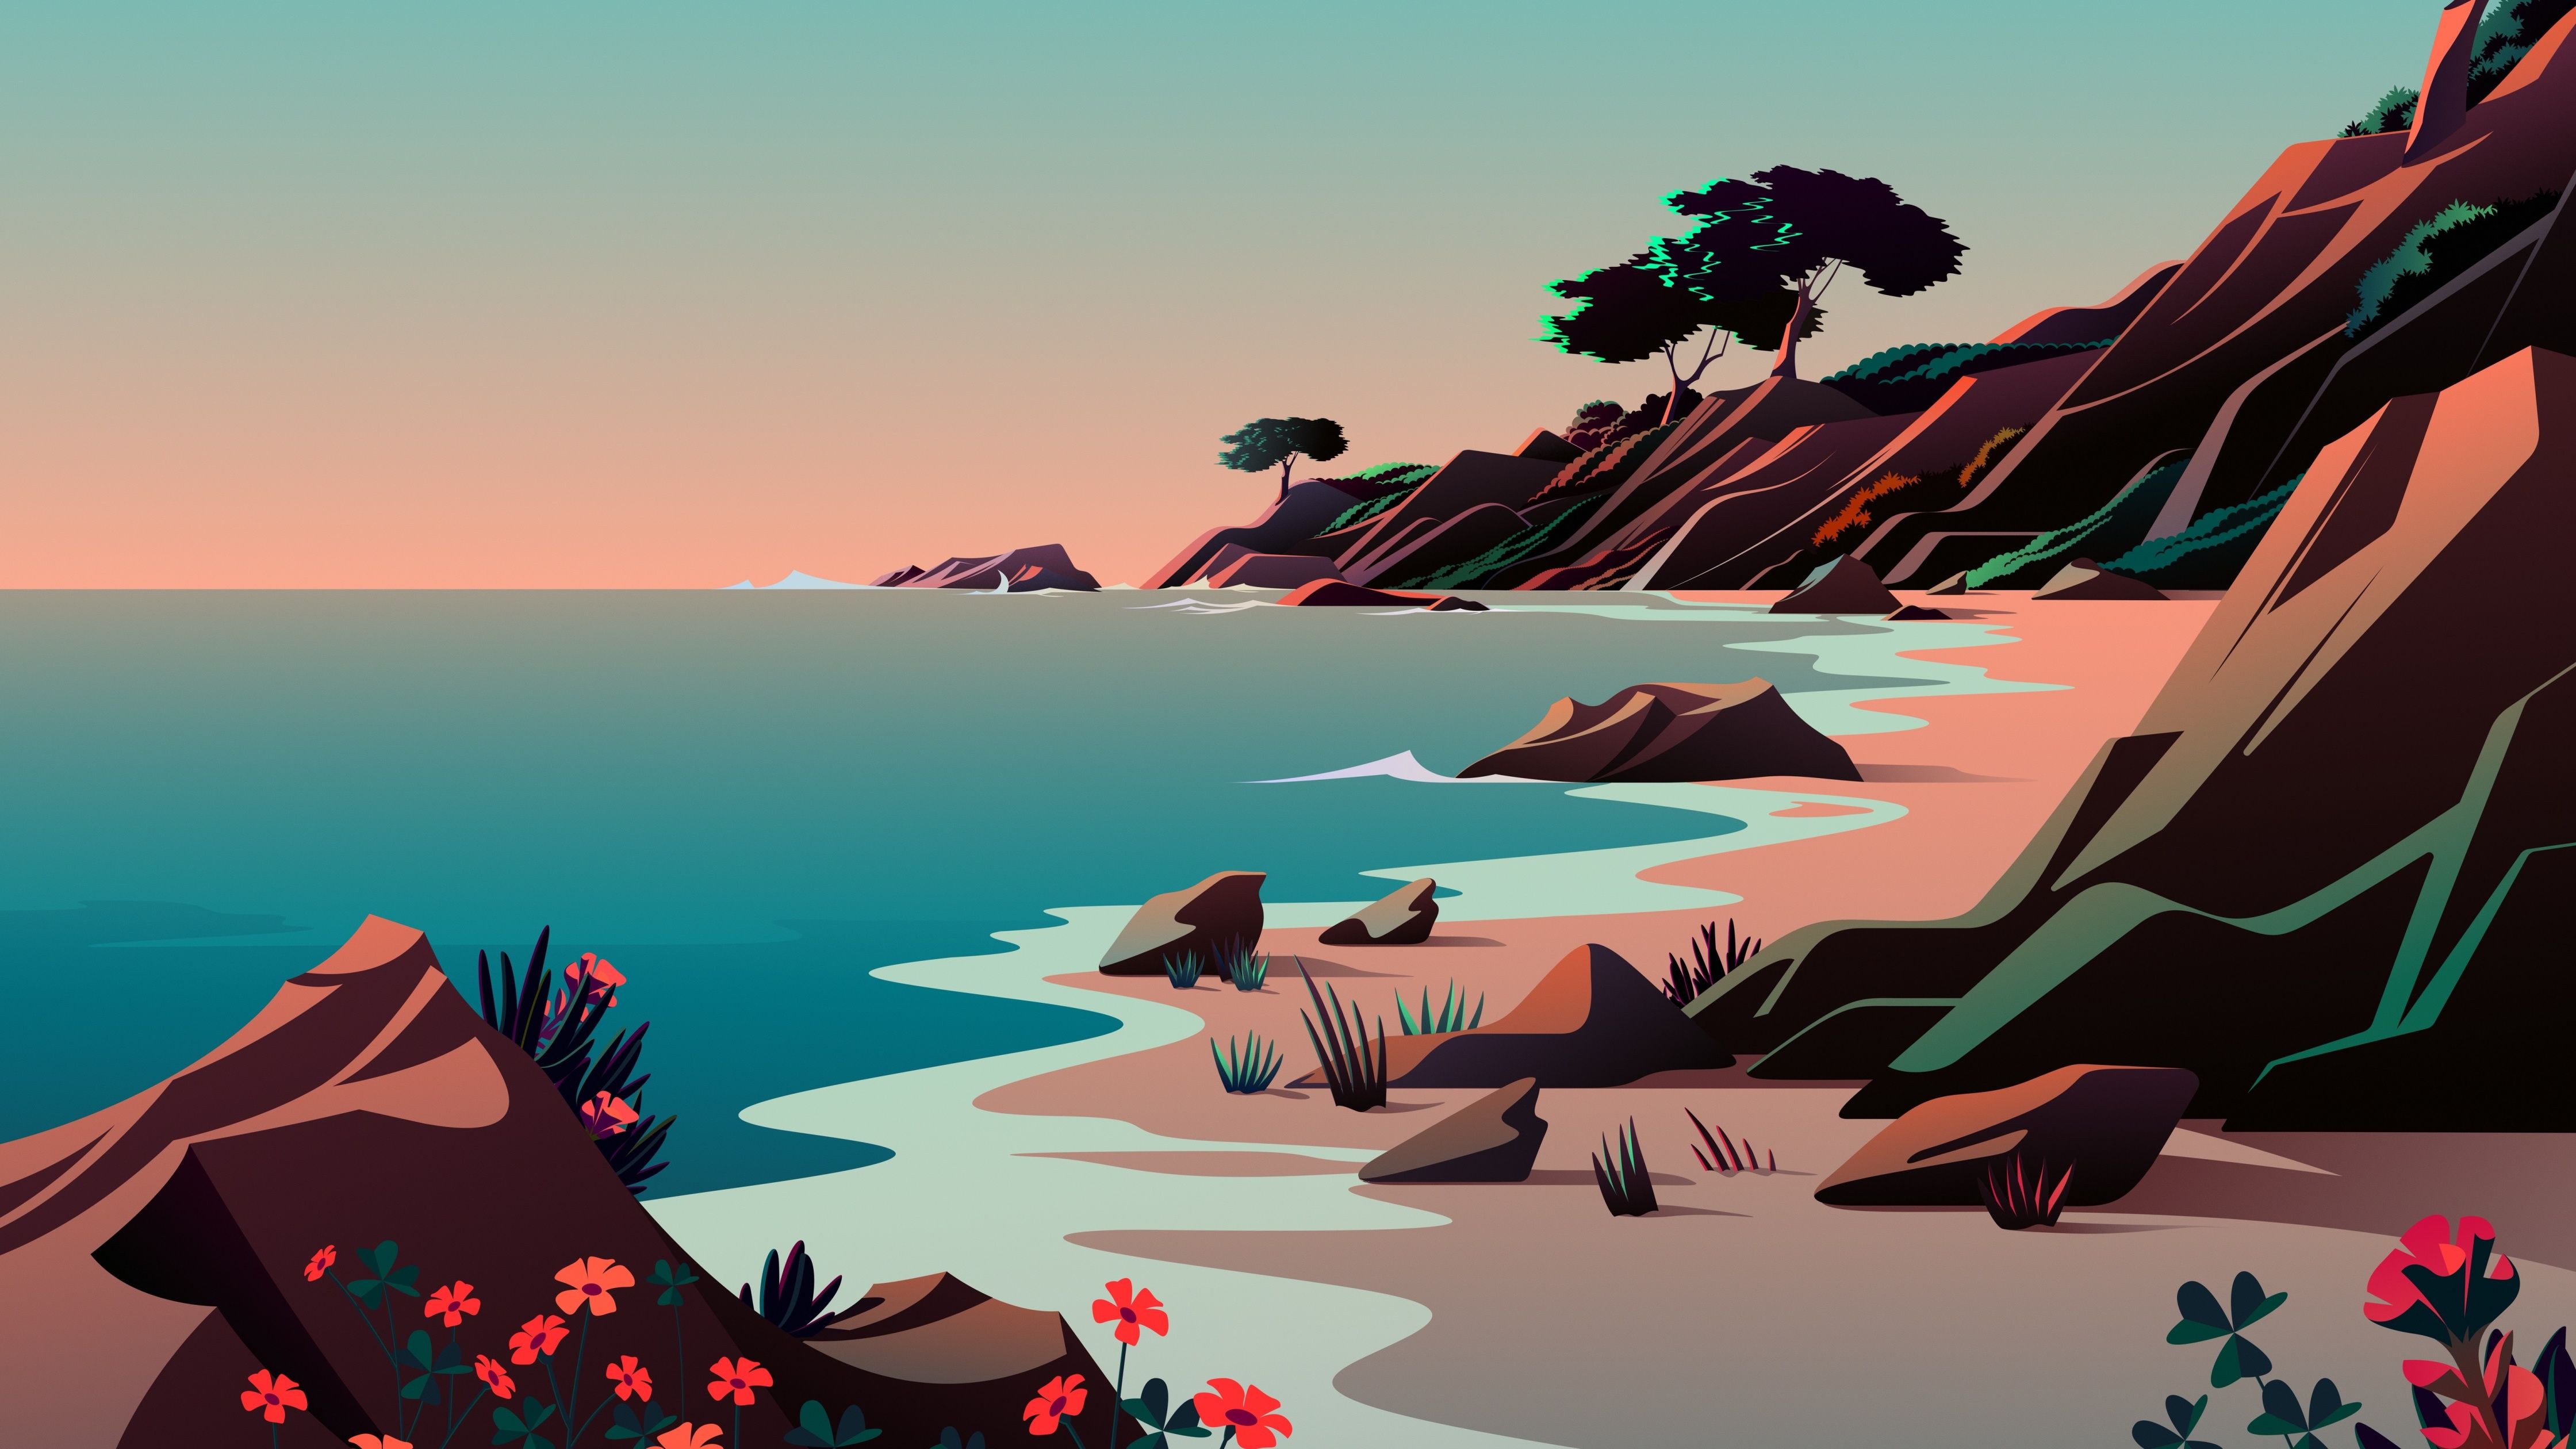 A beach with rocks and flowers at sunset - Scenery, landscape, iMac, illustration